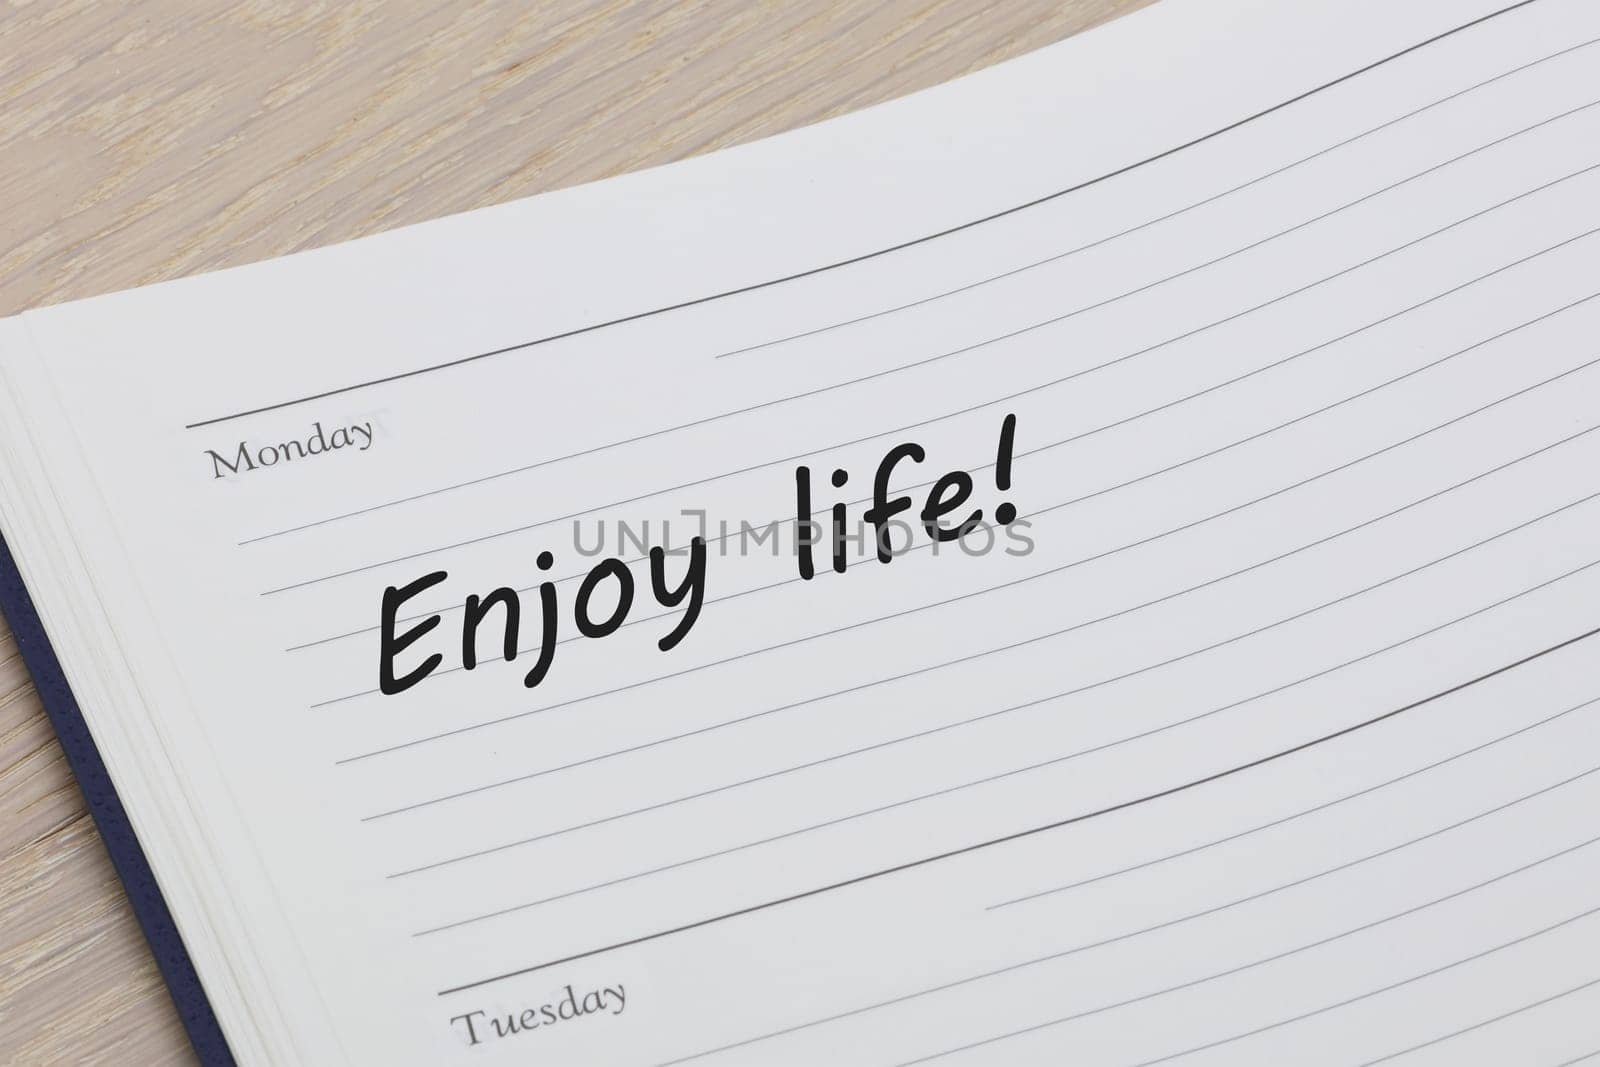 Enjoy life reminder message in an open diary by VivacityImages